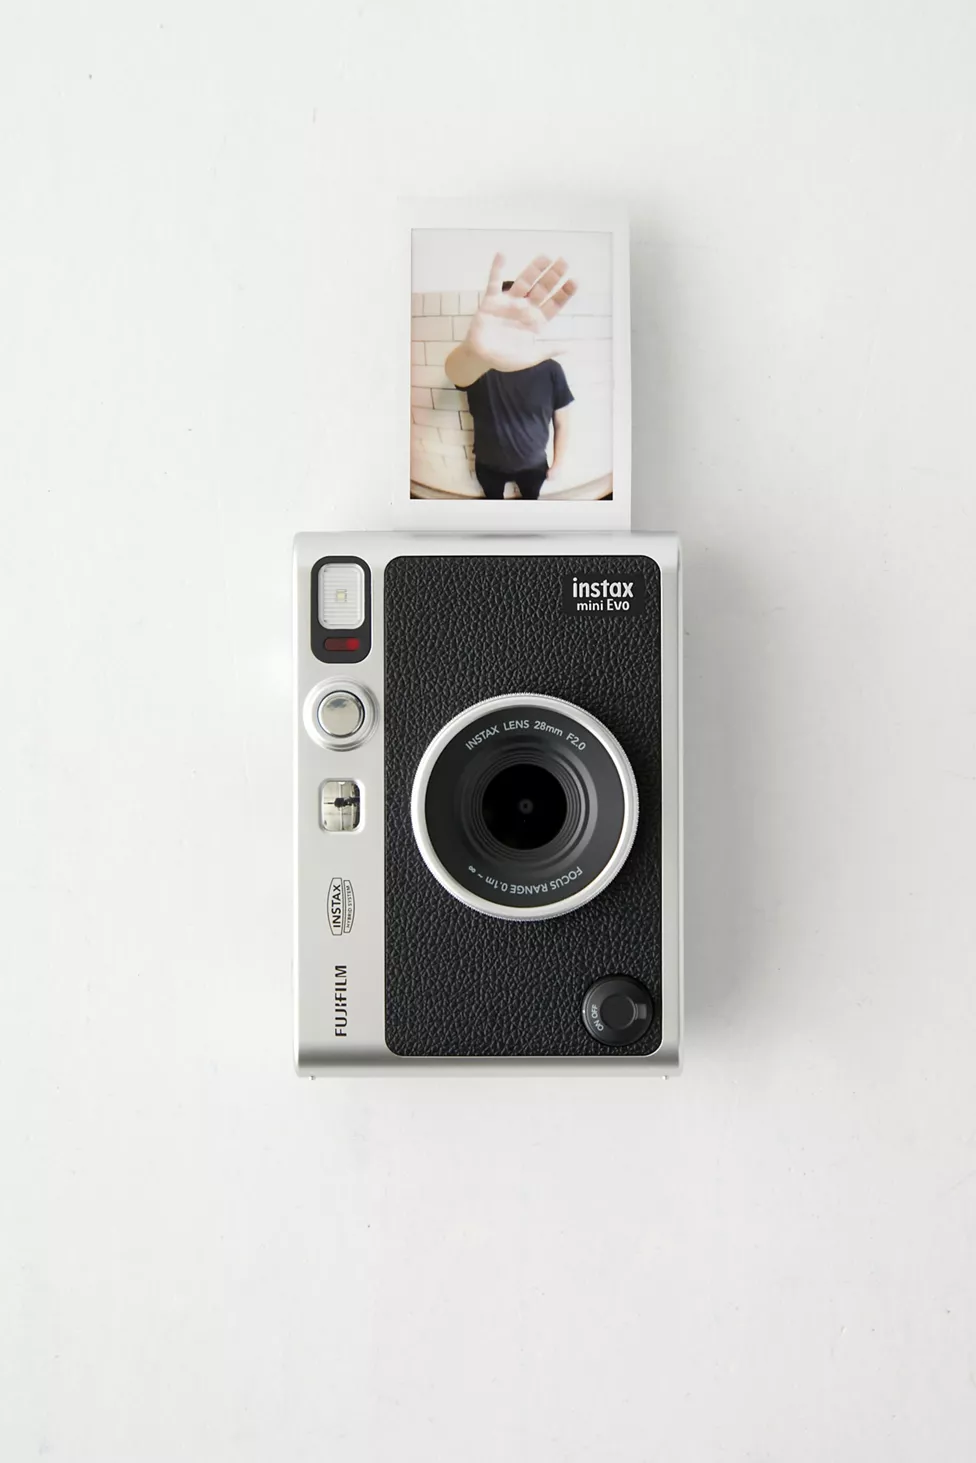 Engagement gift ideas engaged friend vintage inspired instant photo printer